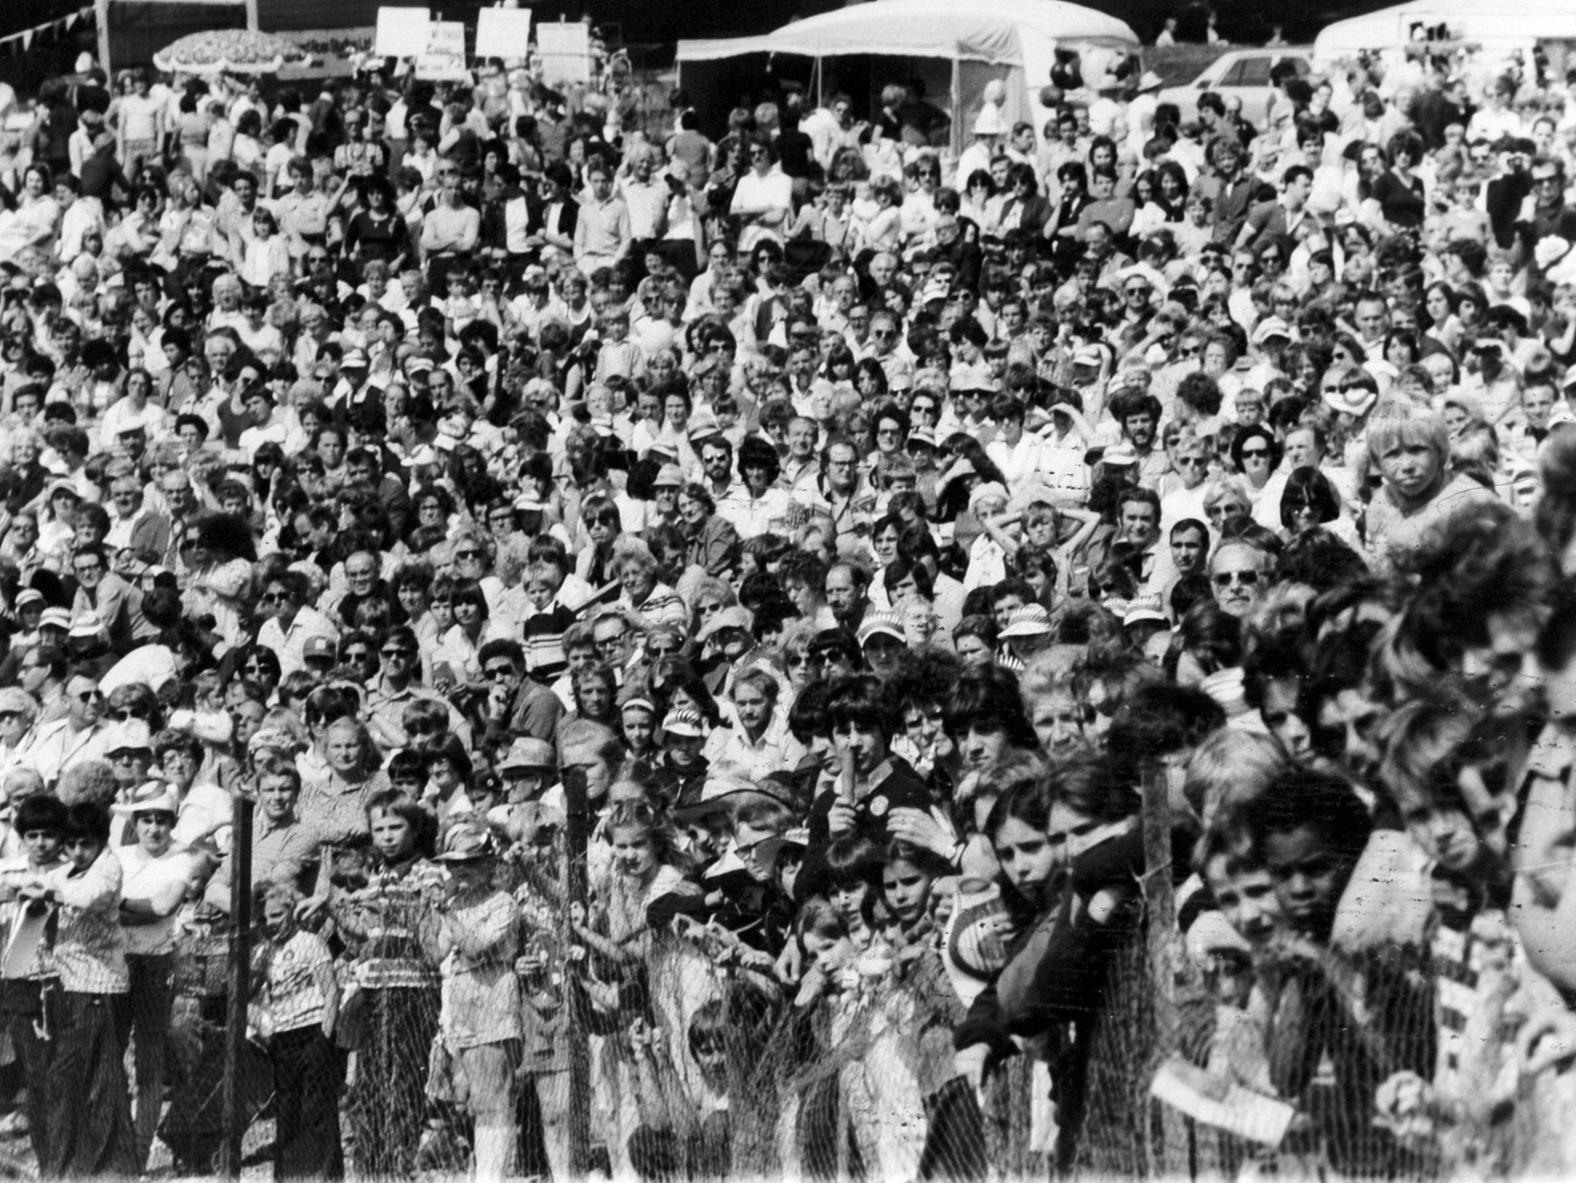 The crowds at Leeds Gala. Share your memories of 1980 with Andrew Hutchinson via email at: andrew.hutchinson@jpress.co.uk or tweet him @AndyHutchYPN